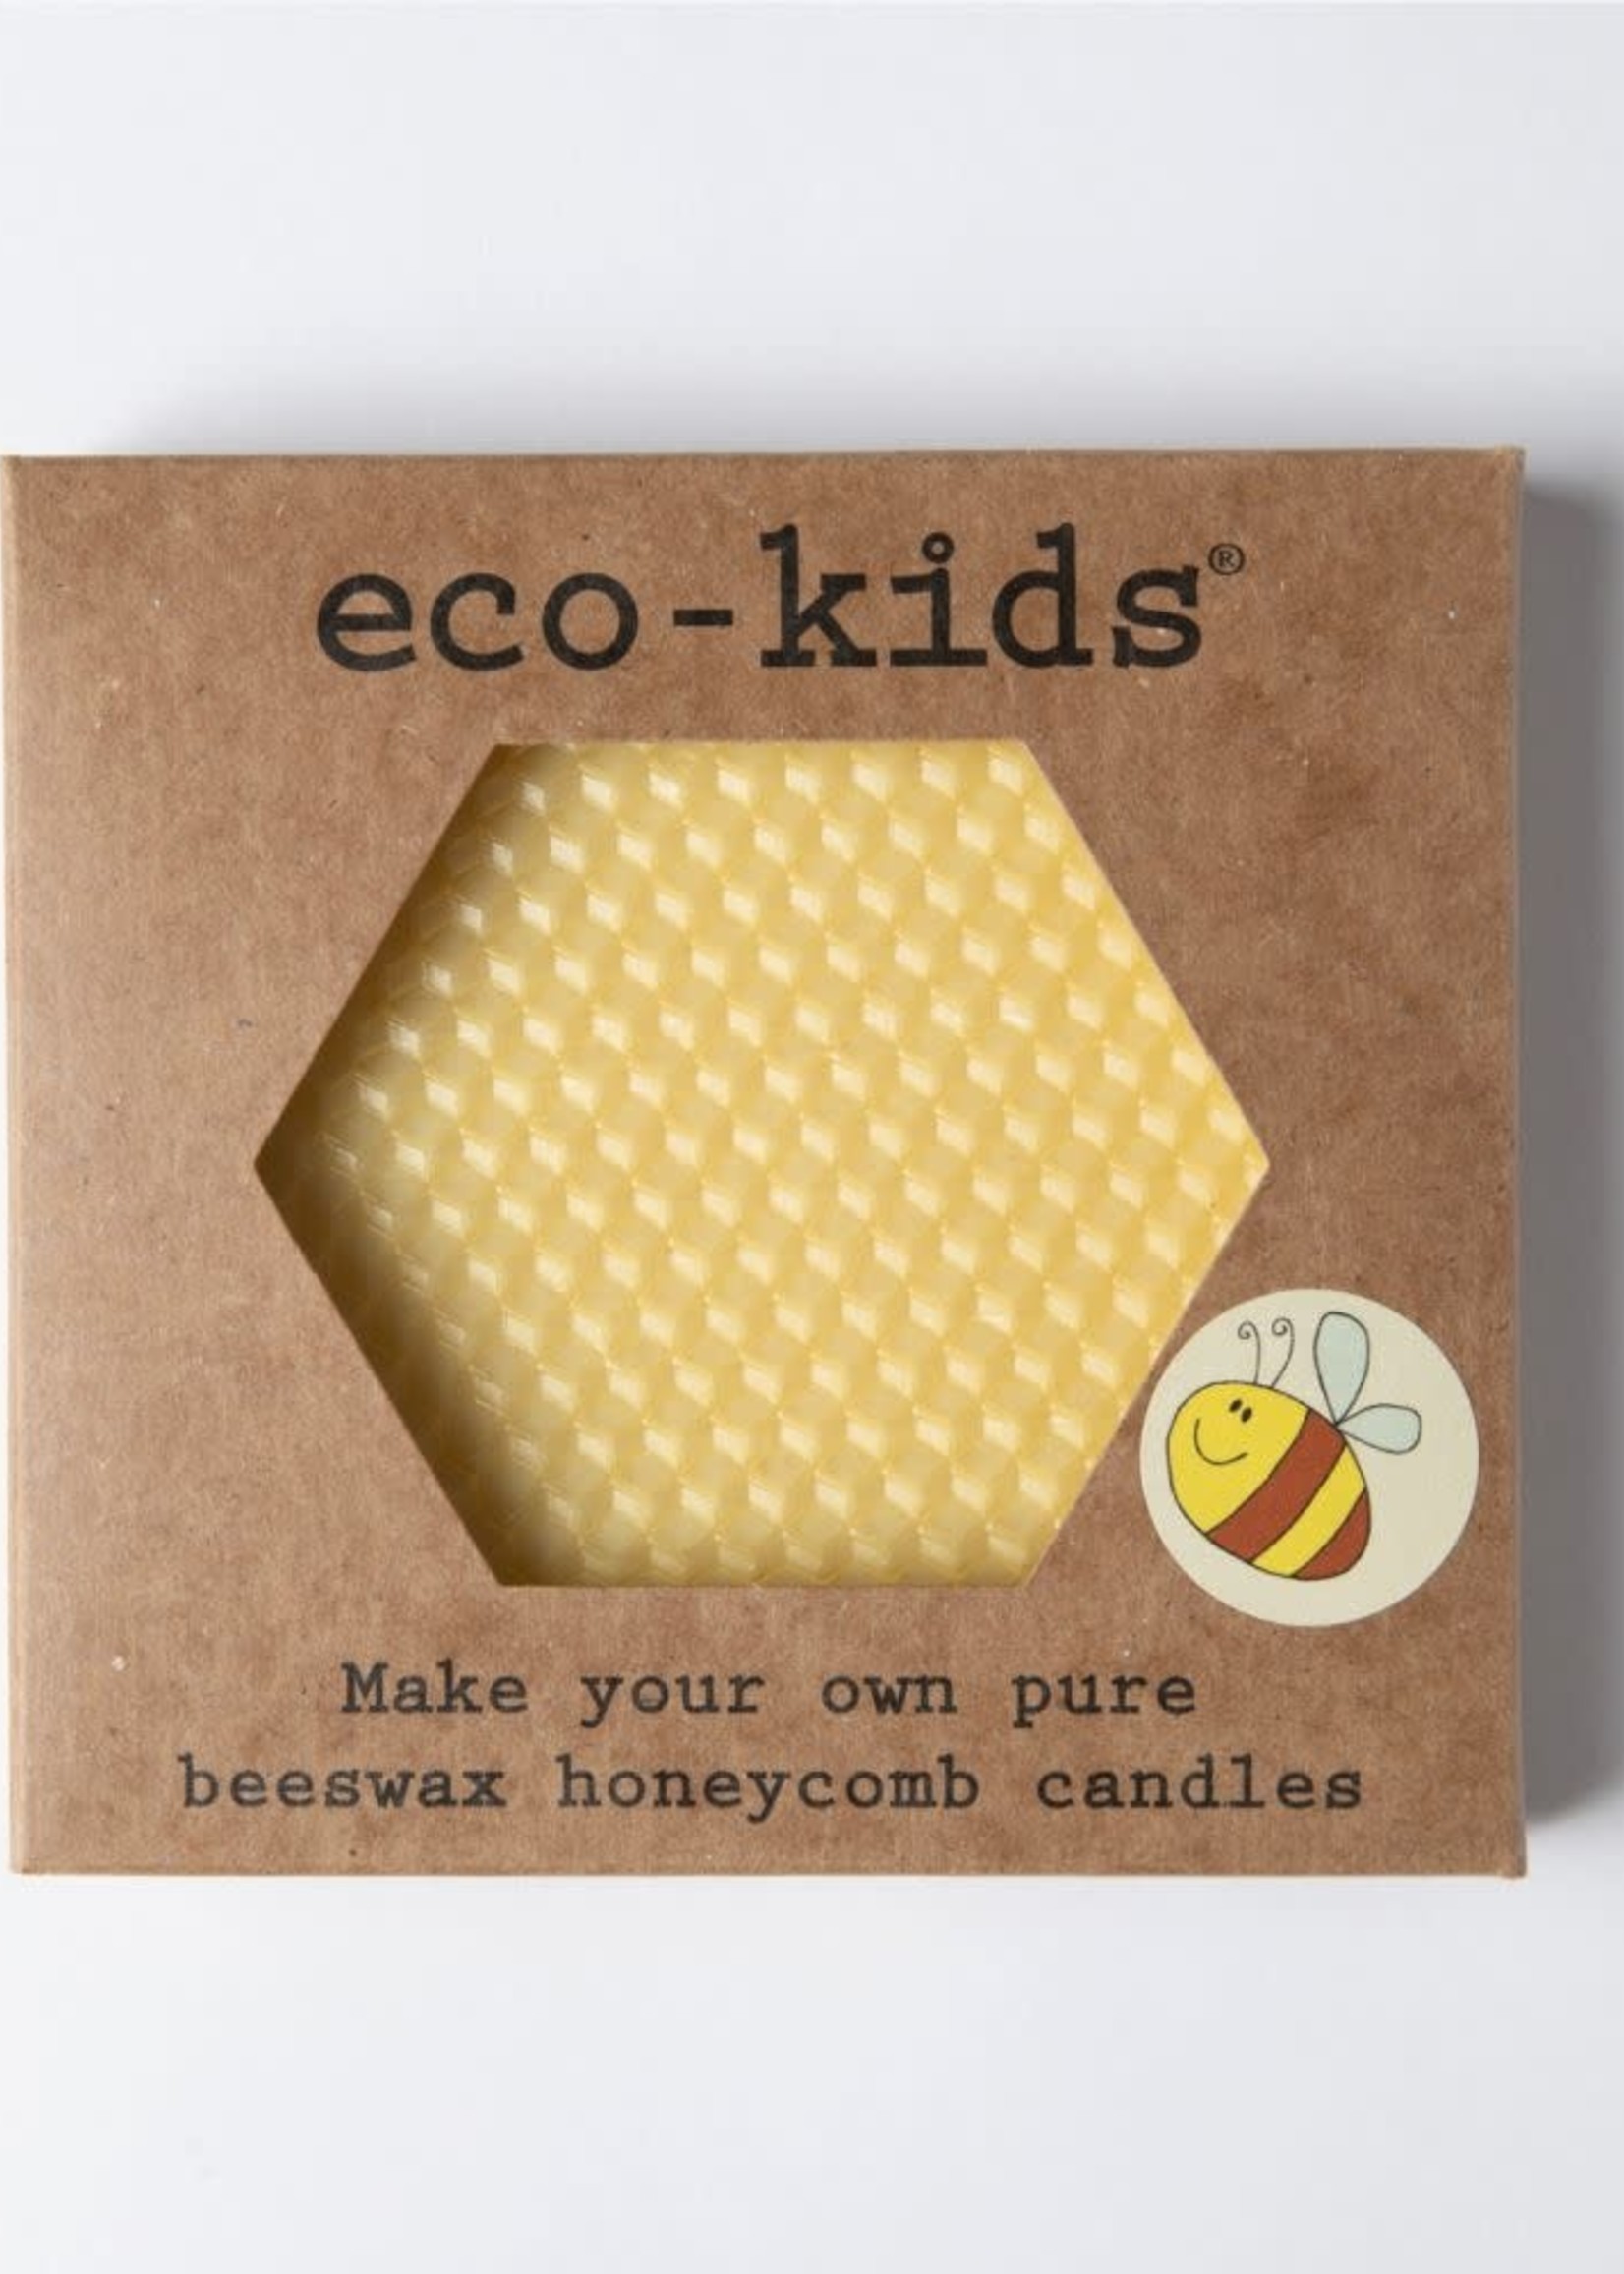 FK Living eco-kids Beeswax Honeycomb Candle Kit